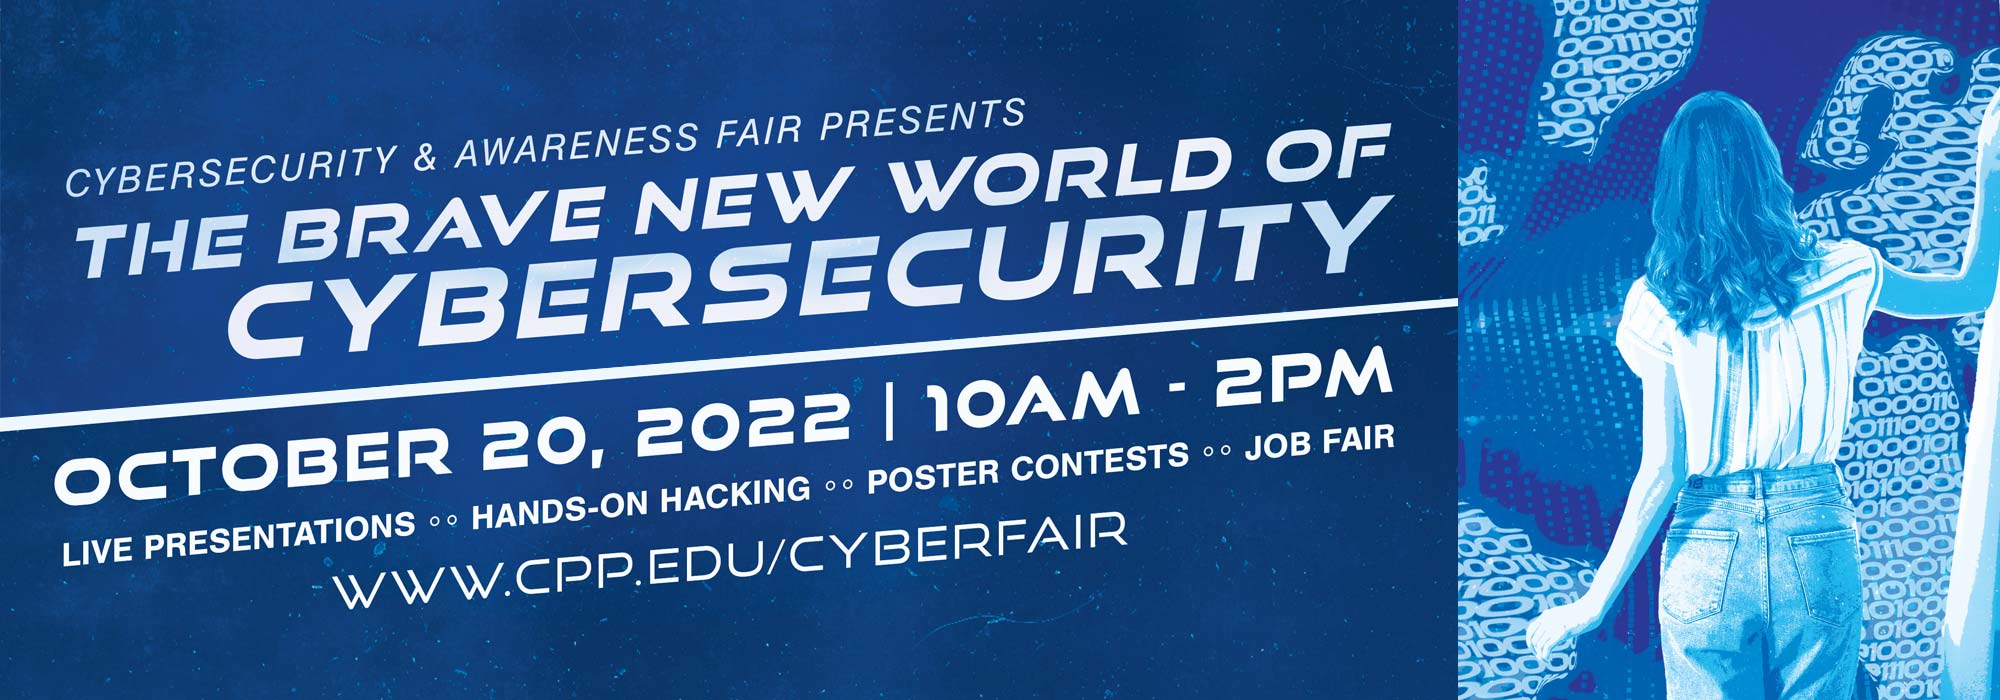 Cybersecurity and awareness fair presents the brave new world of cyber security October 27, 2022, 10am-2pm